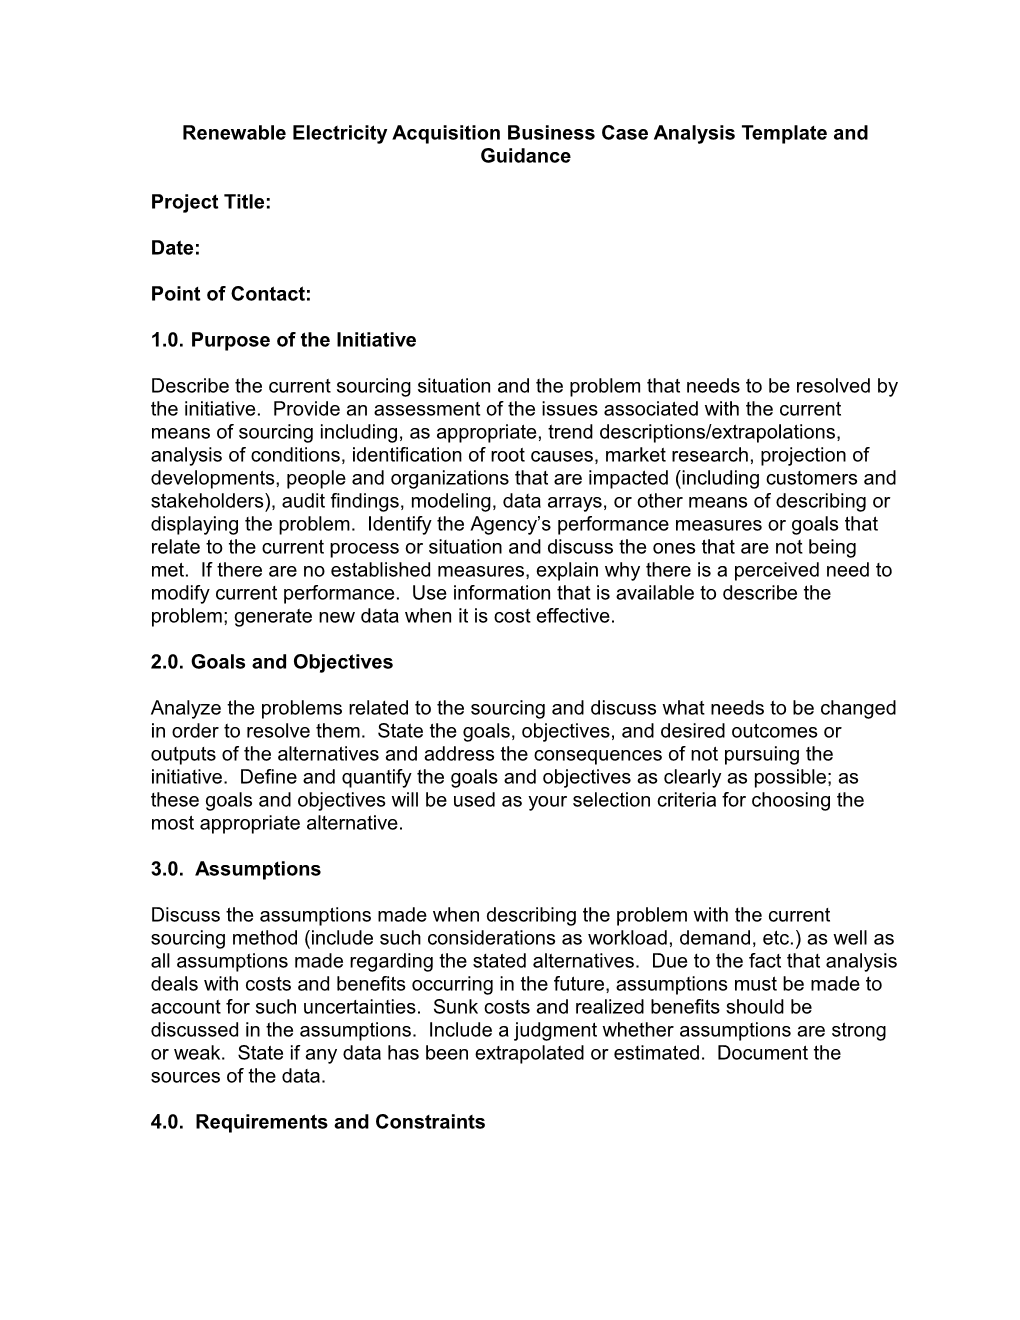 Renewable Electricity Acquisition Business Case Analysis Template and Guidance